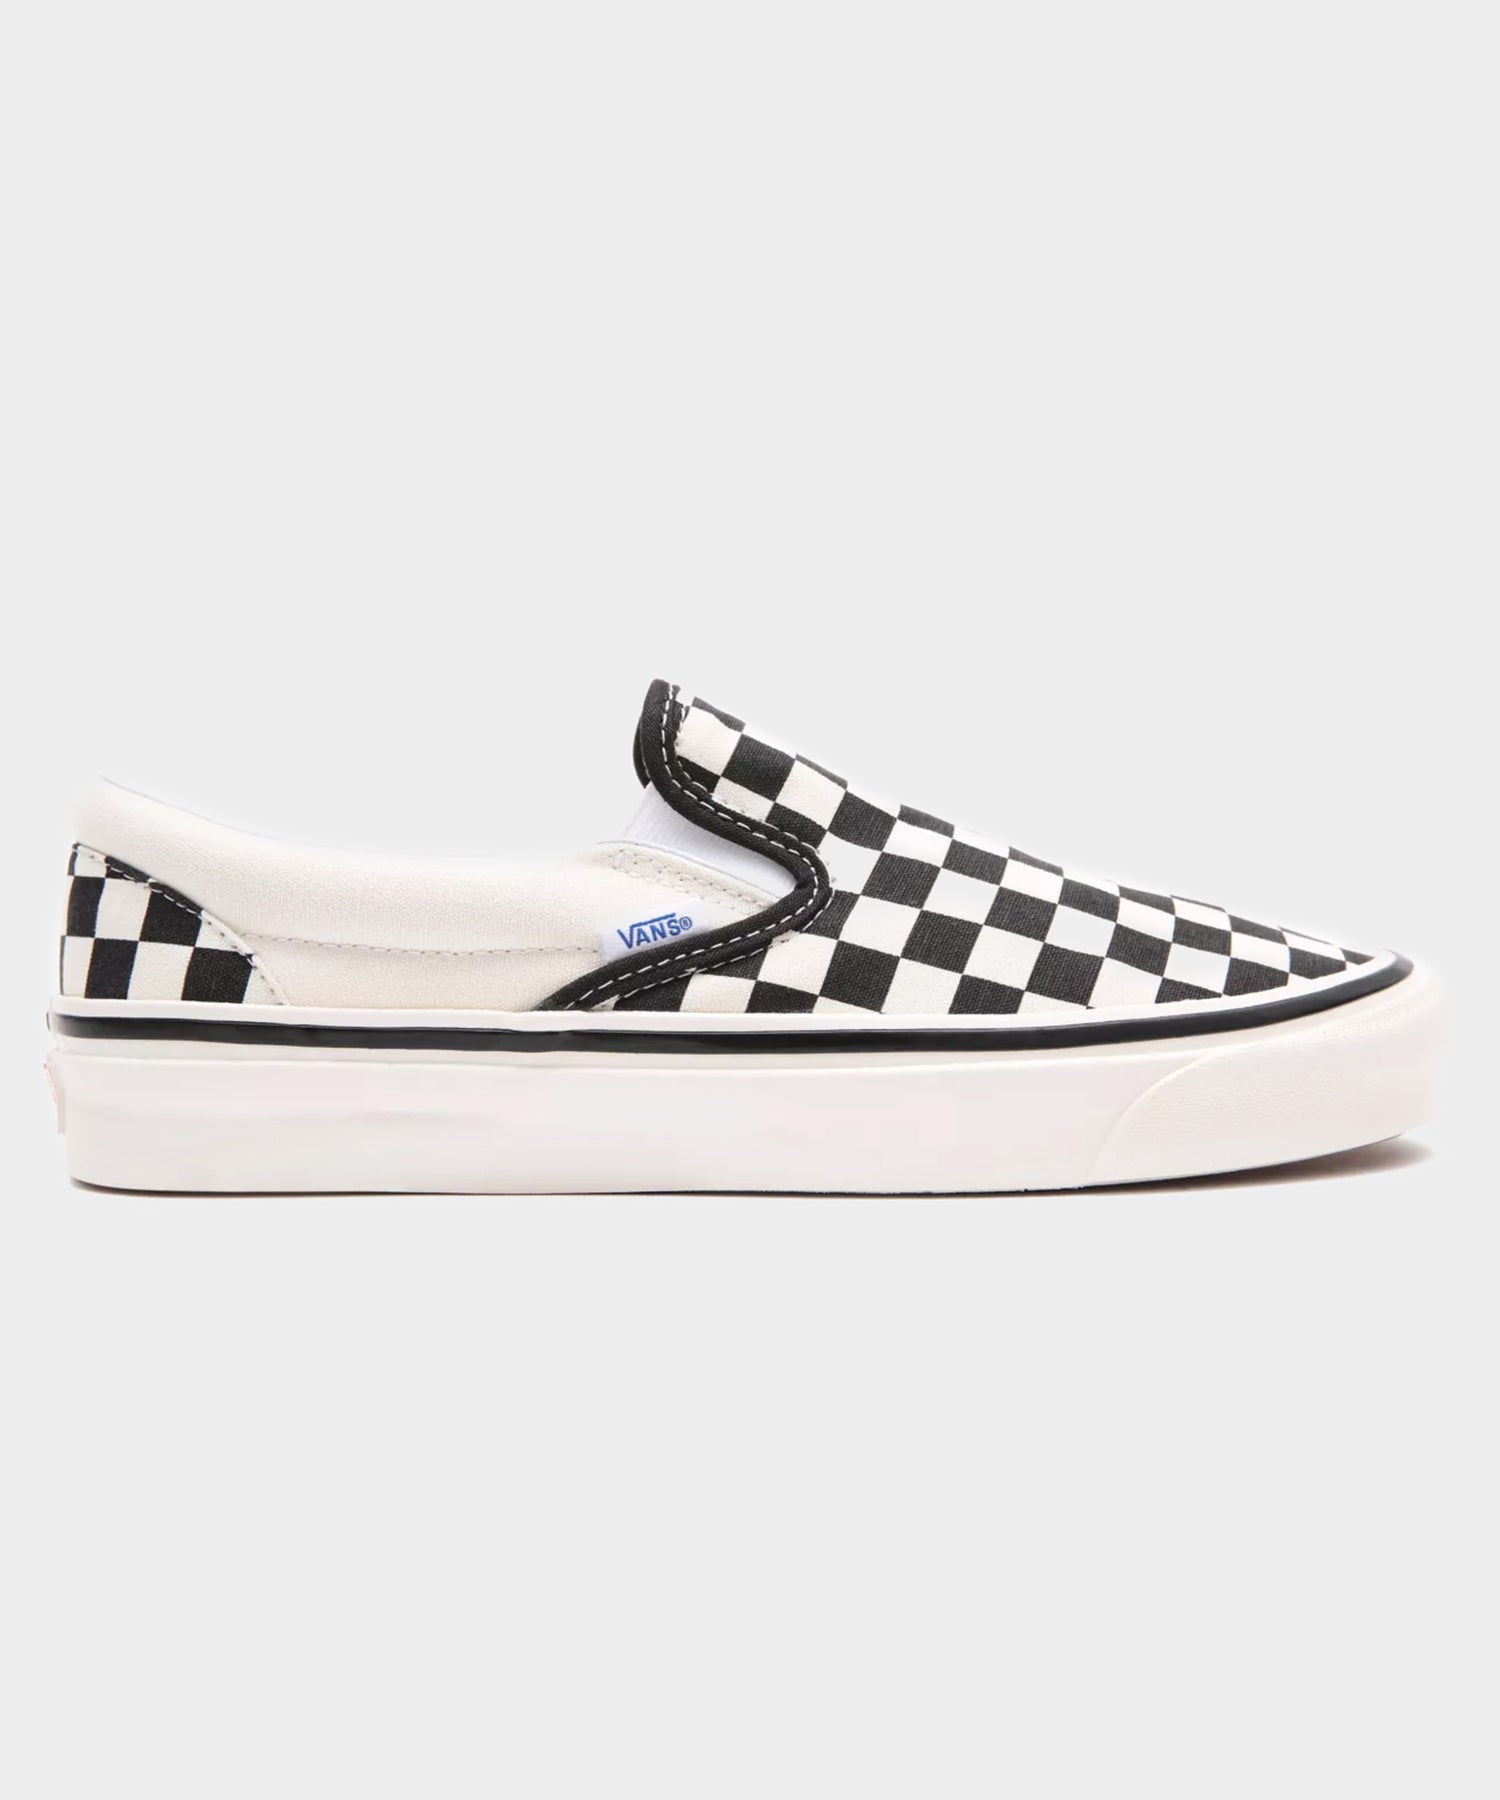 Vans Factory Classic Slip On in Checkerboard